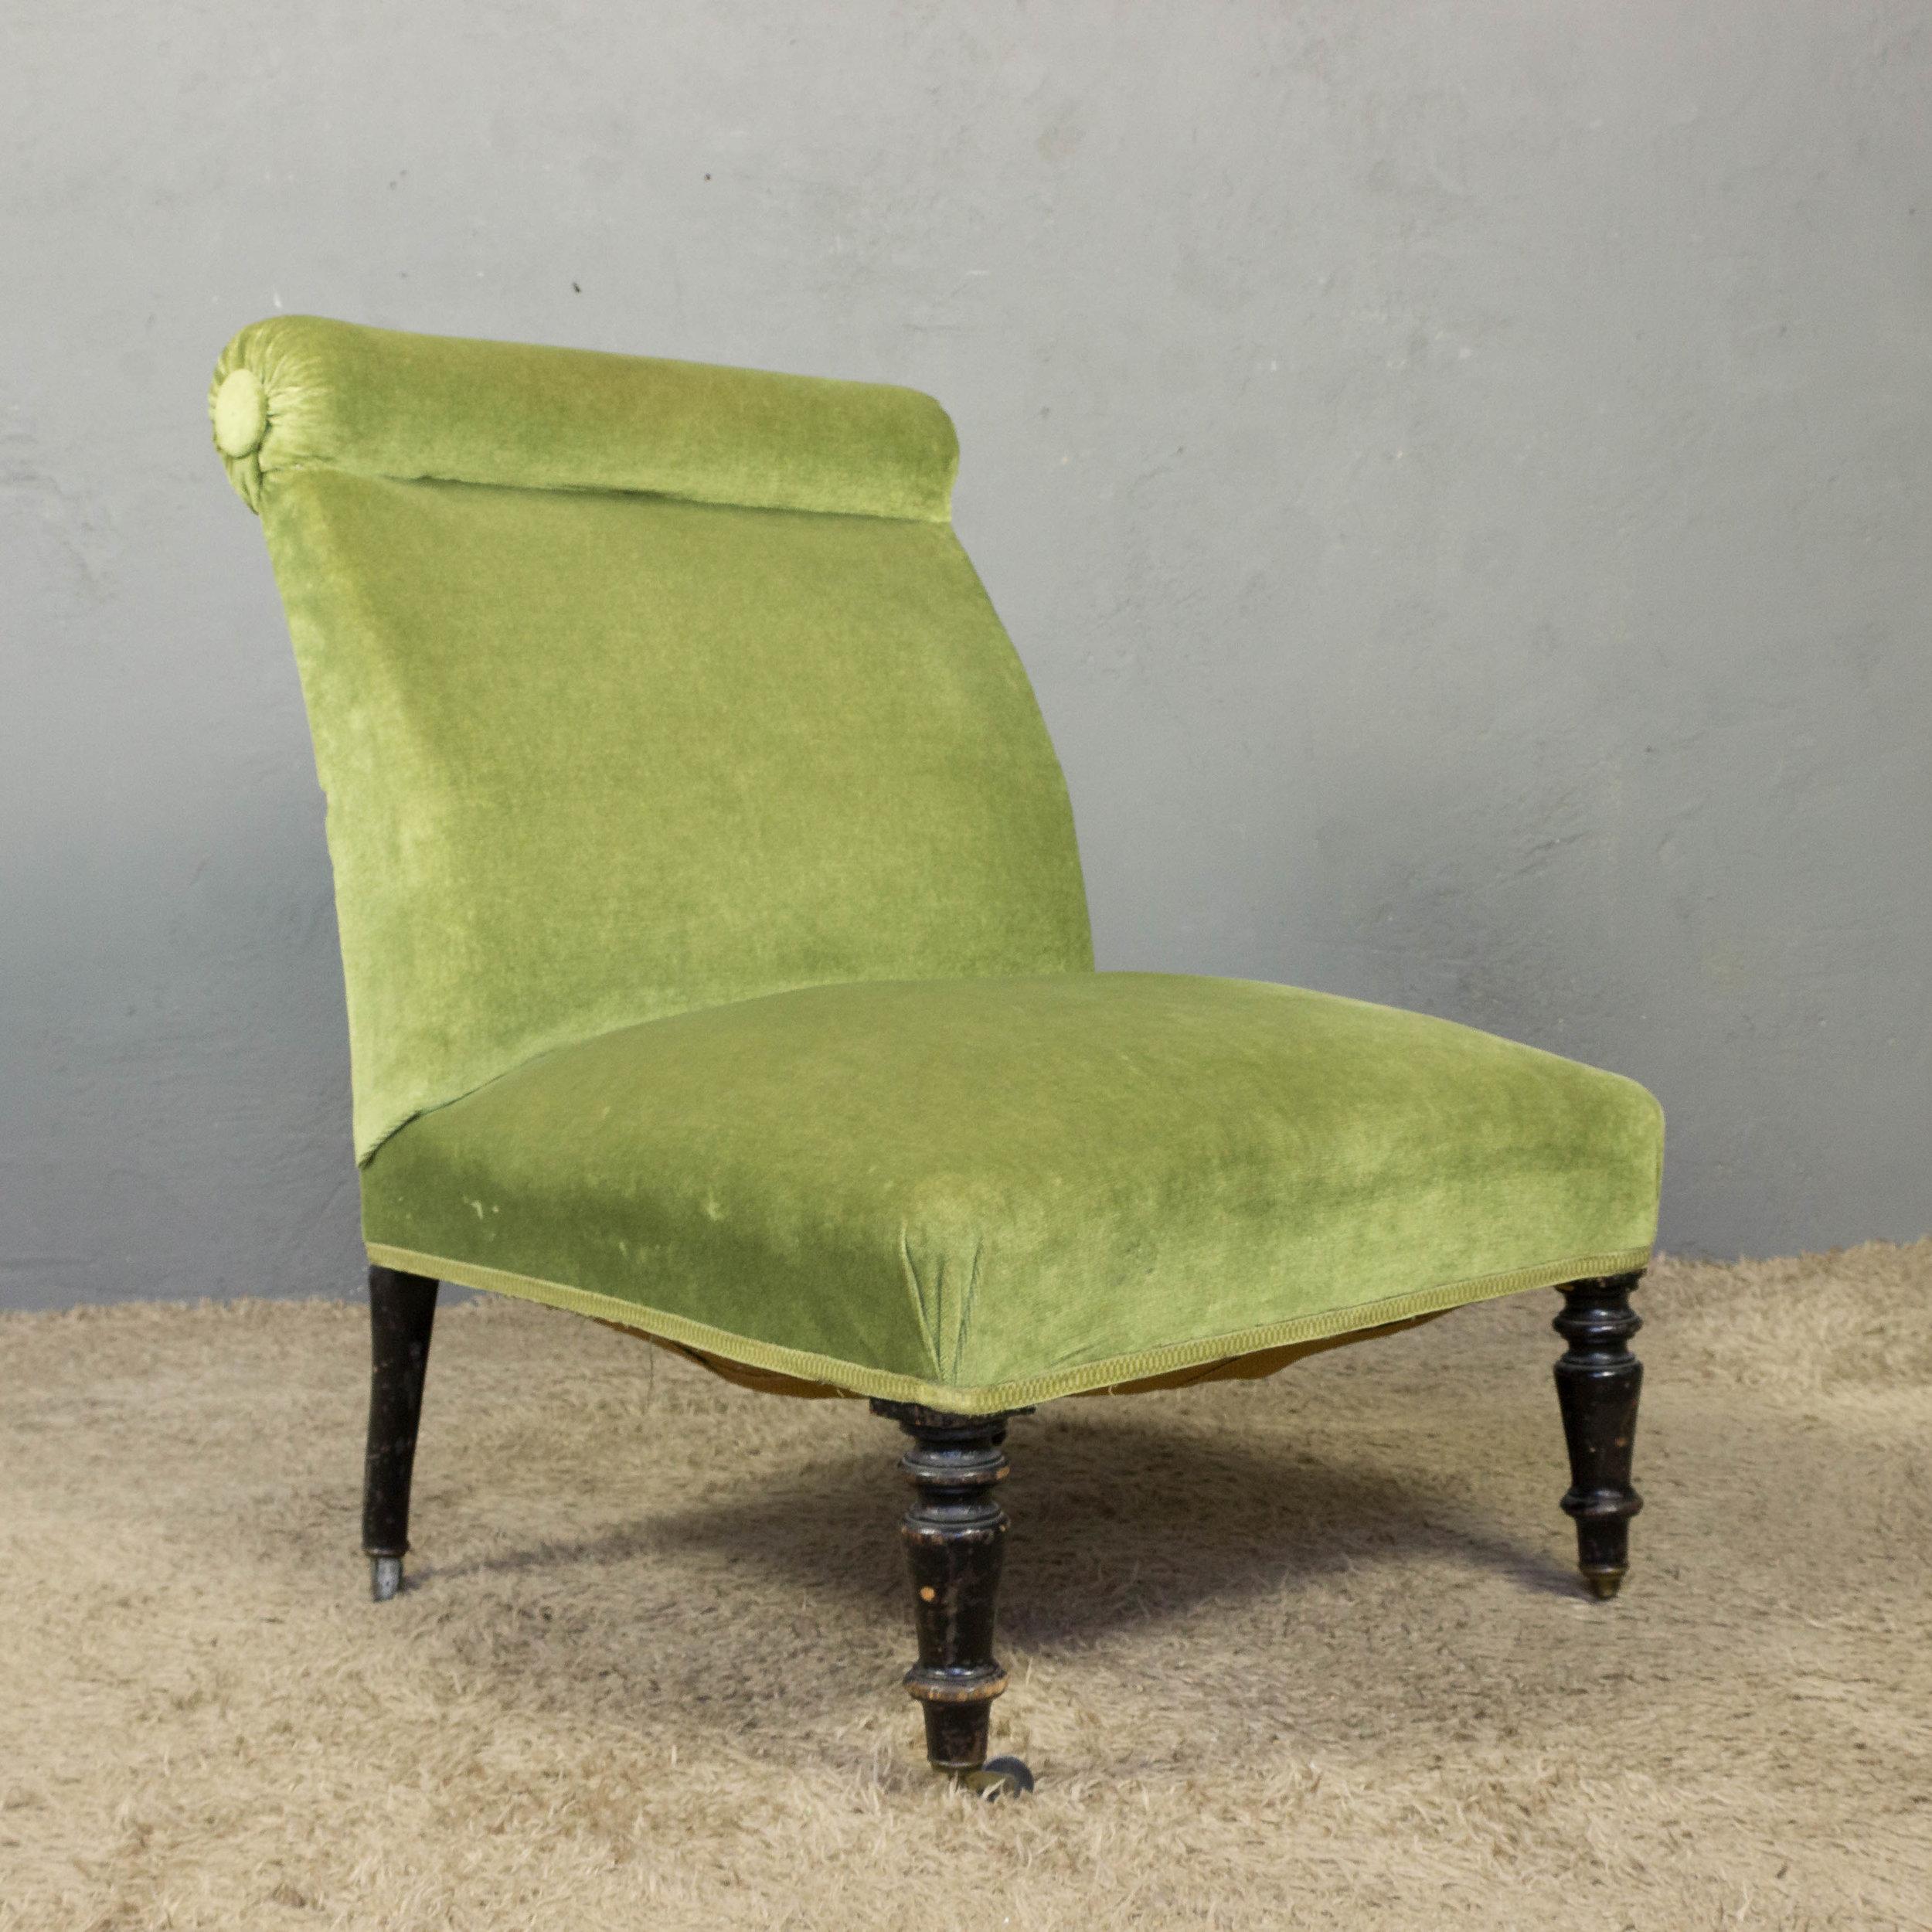 A graceful French 19th century Napoleon III slipper chair in light green velvet, that is sure to make a statement. The slipper chair boasts a scrolled back and captivating light green velvet upholstery, adding an air of refinement to any interior.